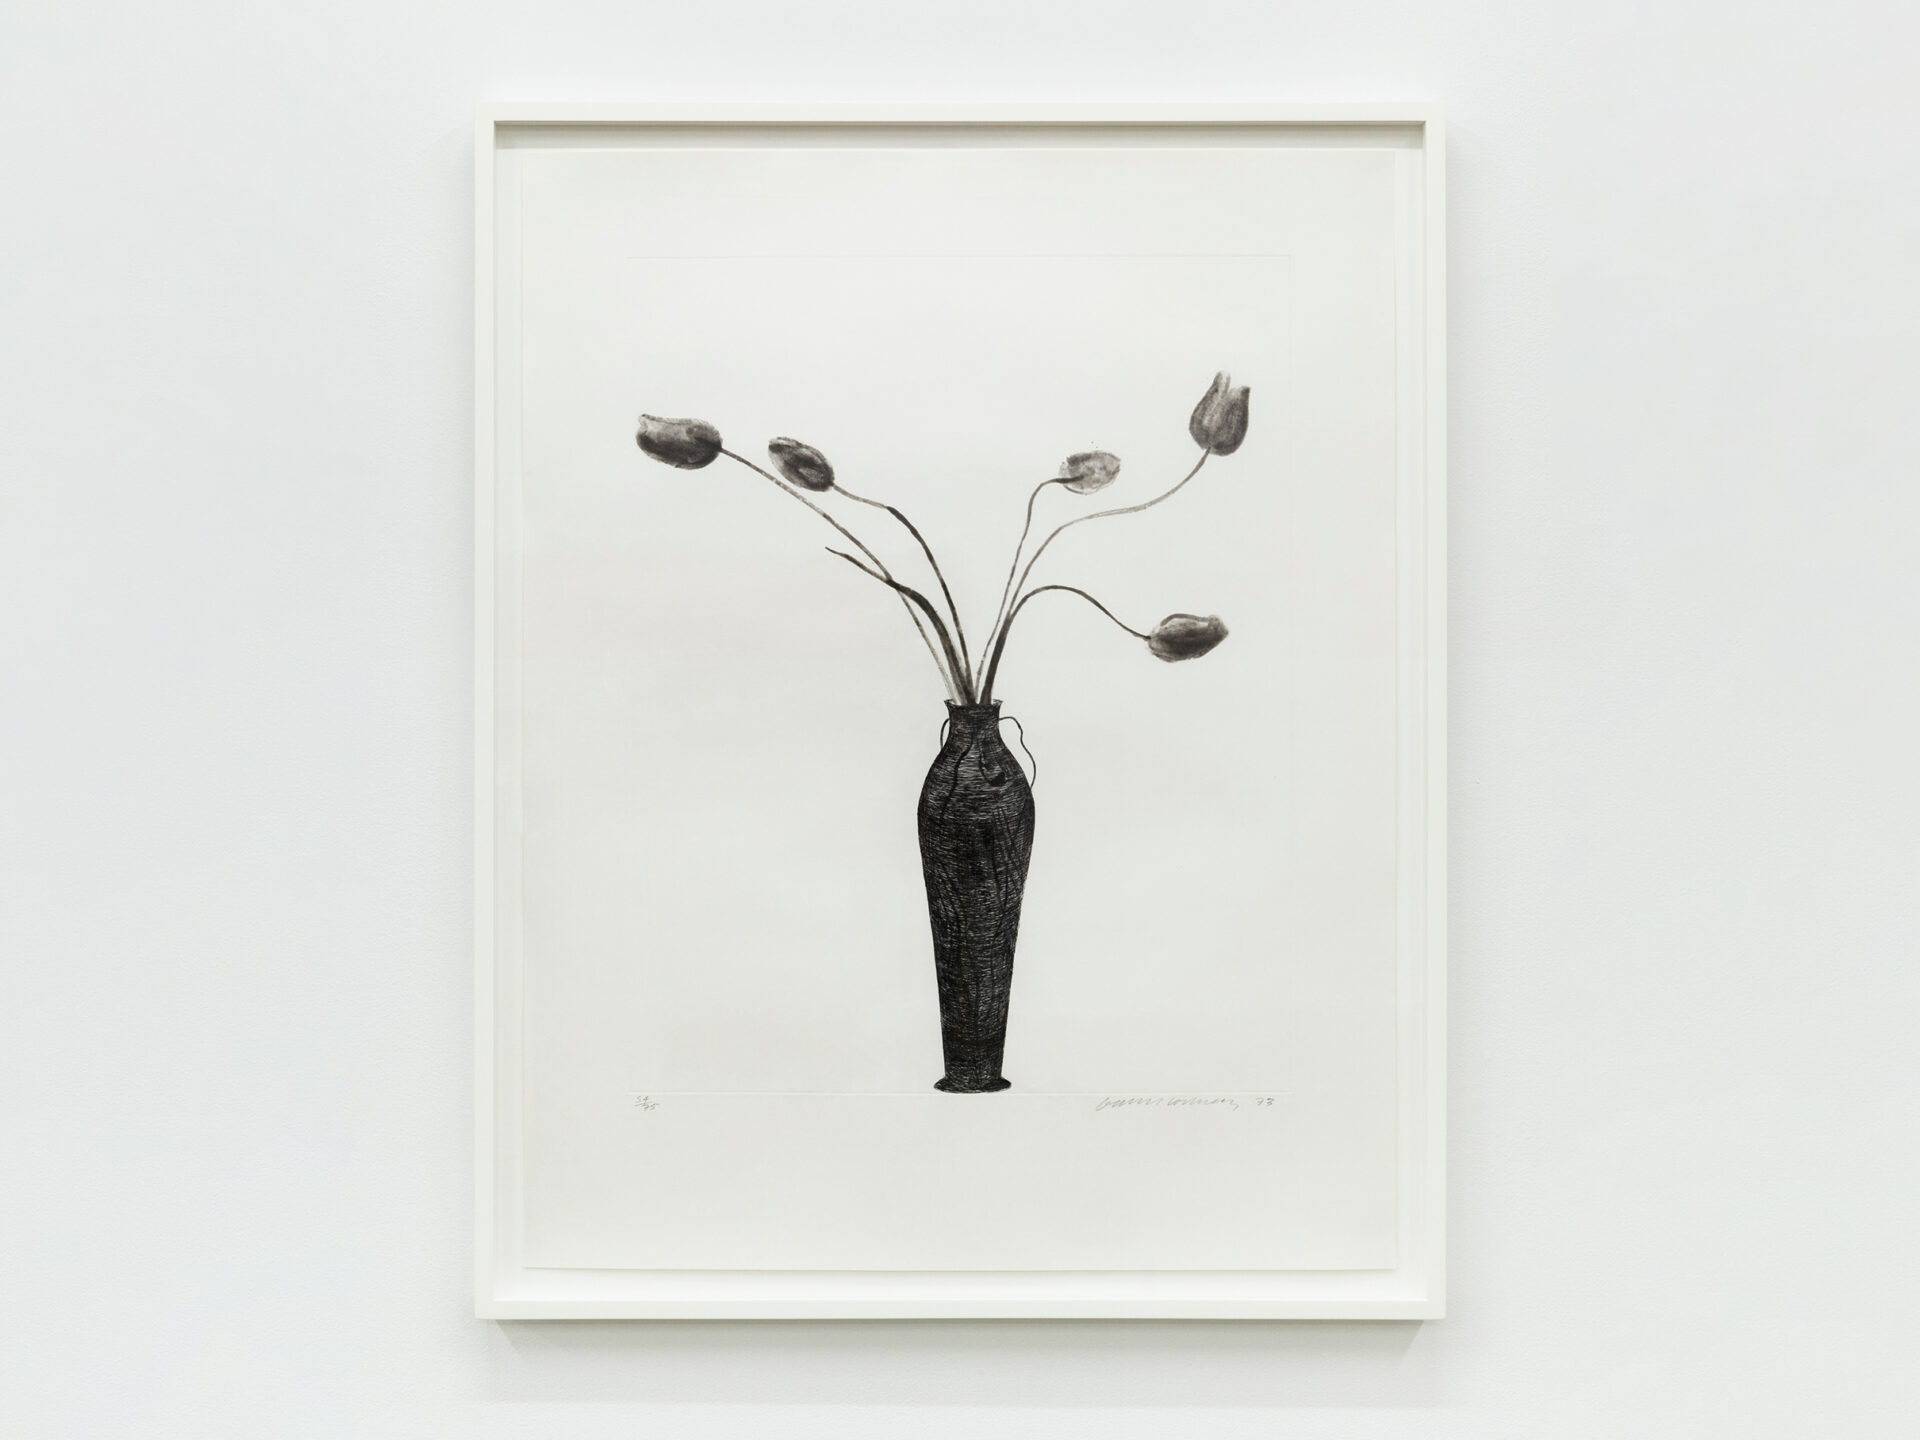 David Hockney, Tulips, 1973 Etching and aquatint Image Dimensions: 27 x 21 3/8 inches (68.6 x 54.3 cm) 36 x 28 1/8 inches (91.4 x 71.4 cm) Framed Dimensions: 38 3/4 x 31 inches (98.4 x 78.7 cm) Edition of 75